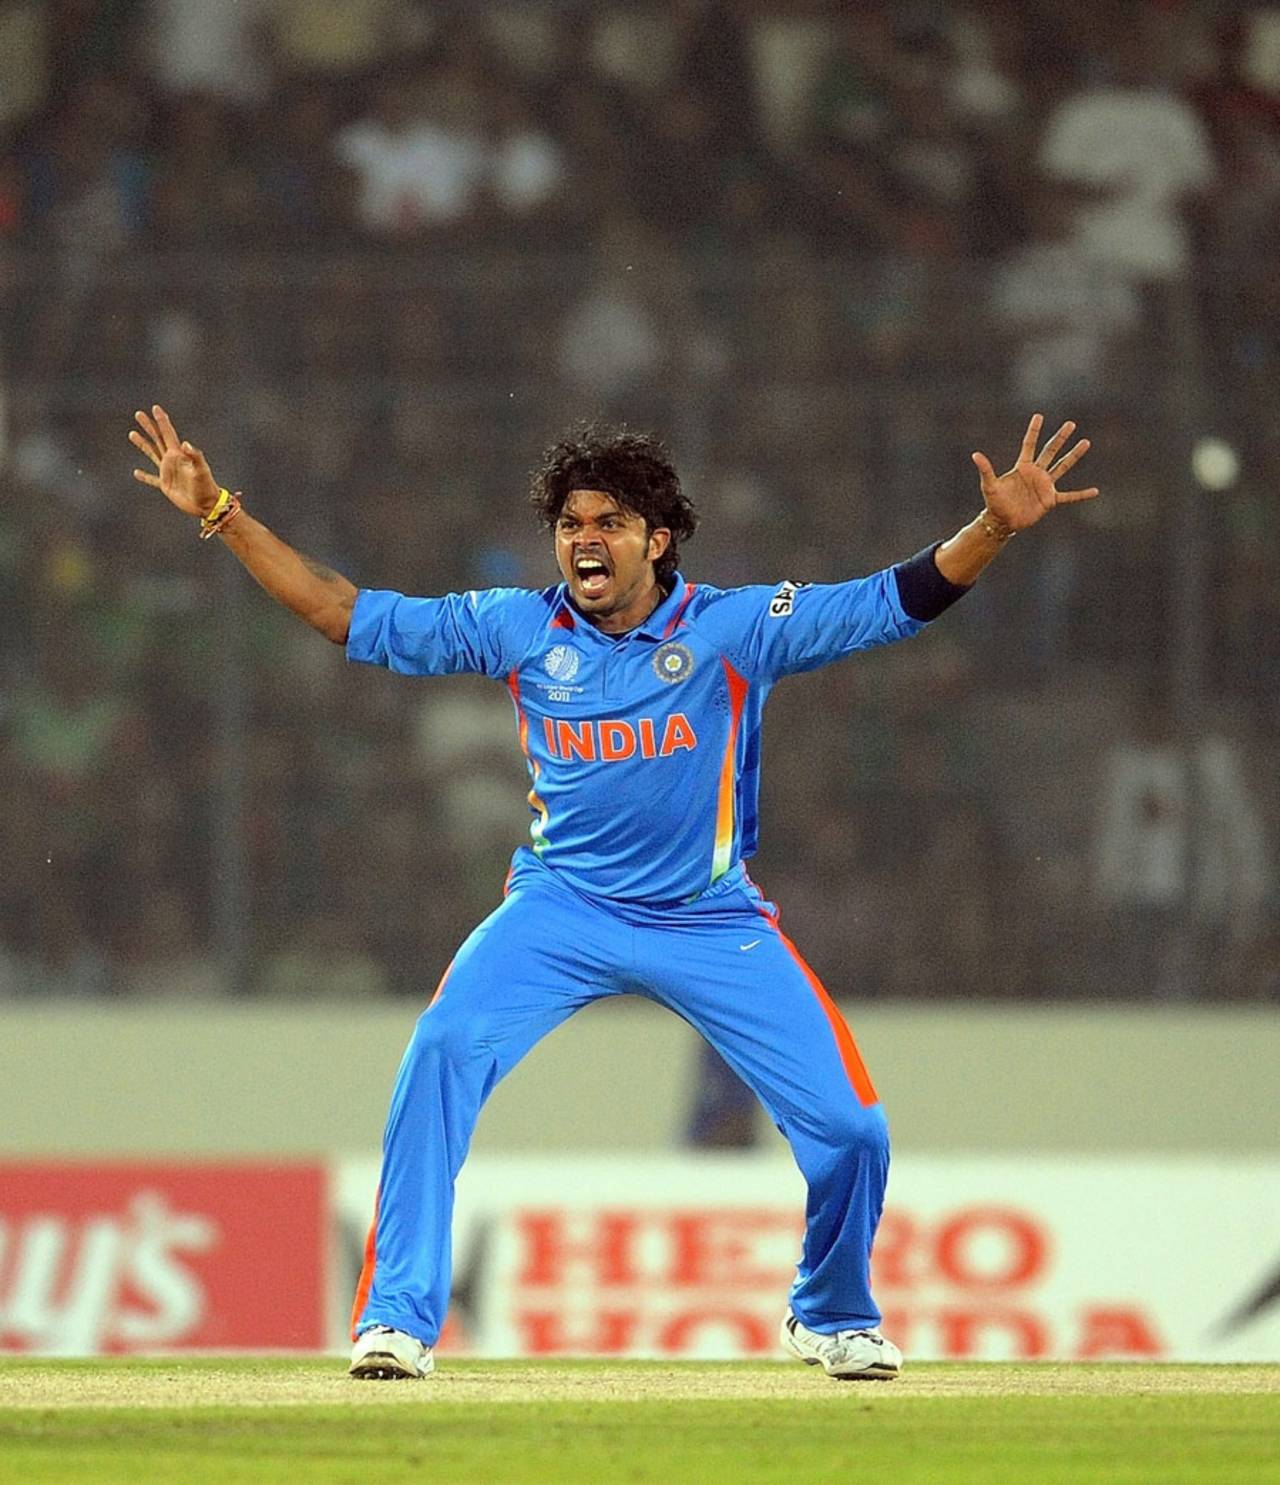 S Sreesanth unsuccessfully appeals for an LBW, Bangladesh v India, Group B, World Cup 2011, Mirpur, February 19, 2011